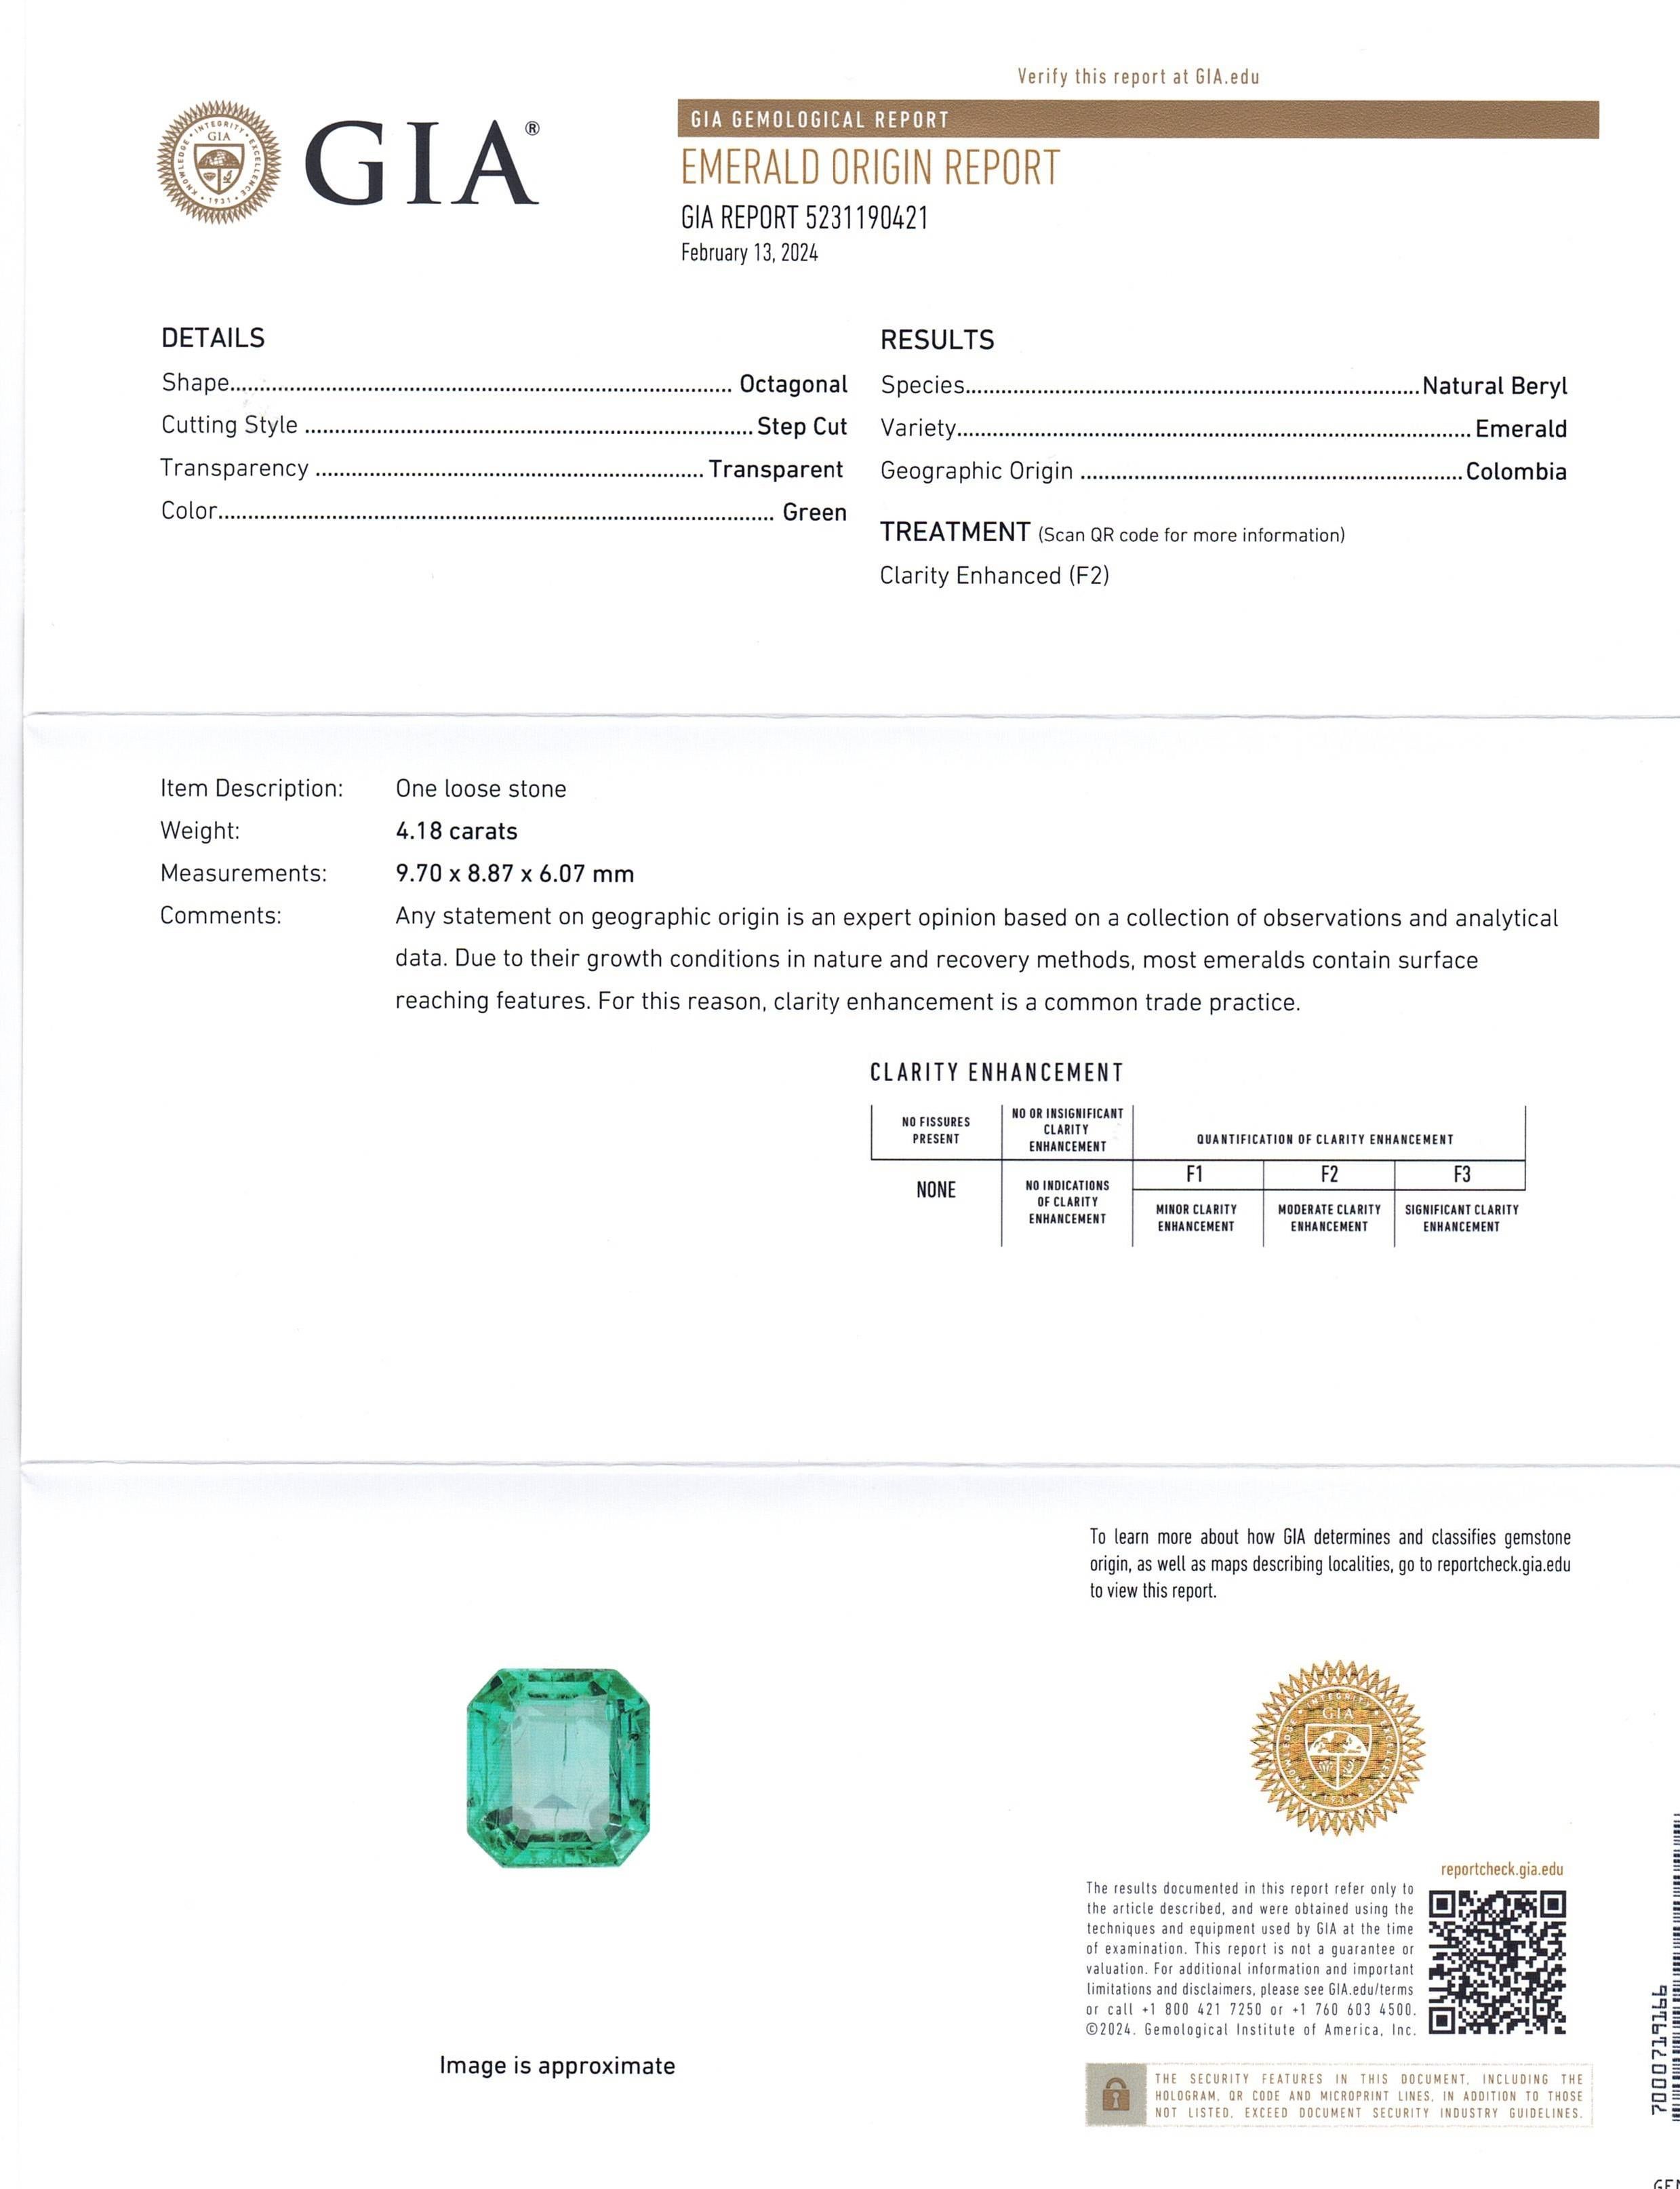 This is a stunning GIA Certified Emerald 


The GIA report reads as follows:

GIA Report Number: 5231190421
Shape: Octagonal
Cutting Style: Step Cut
Cutting Style: Crown: 
Cutting Style: Pavilion: 
Transparency: Transparent
Colour: